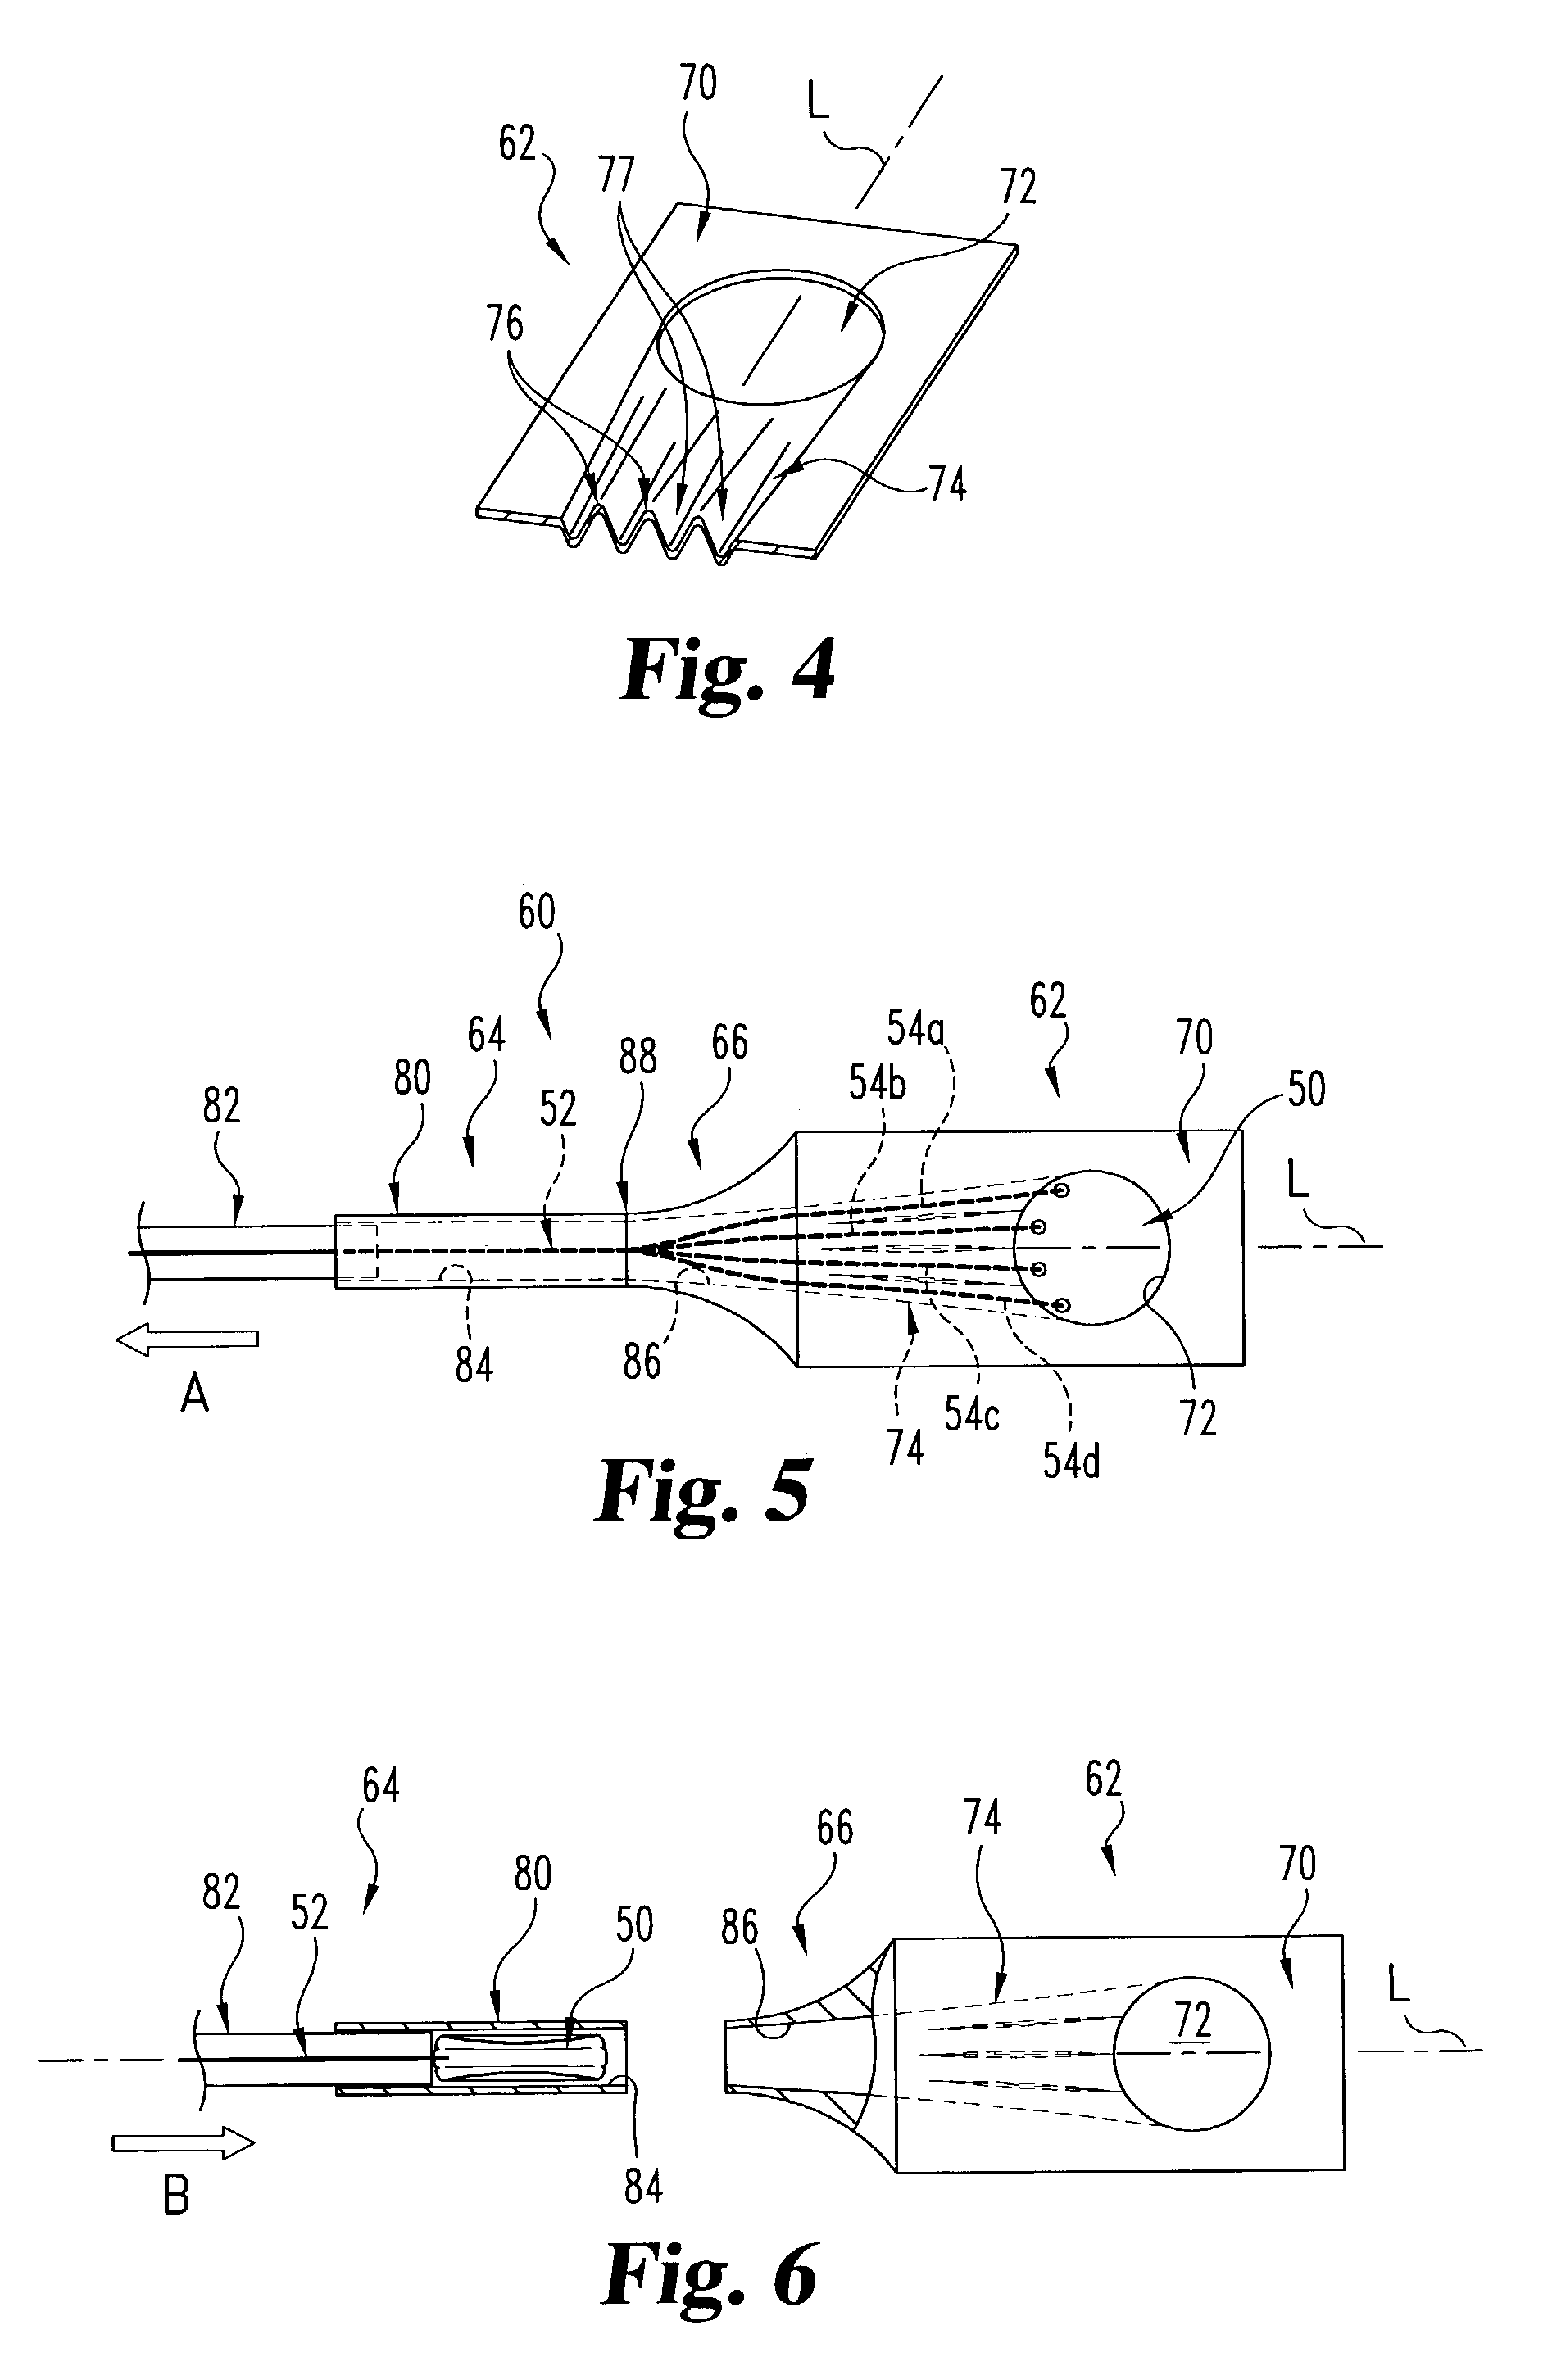 Instrumentation and method for delivering an implant into a vertebral space